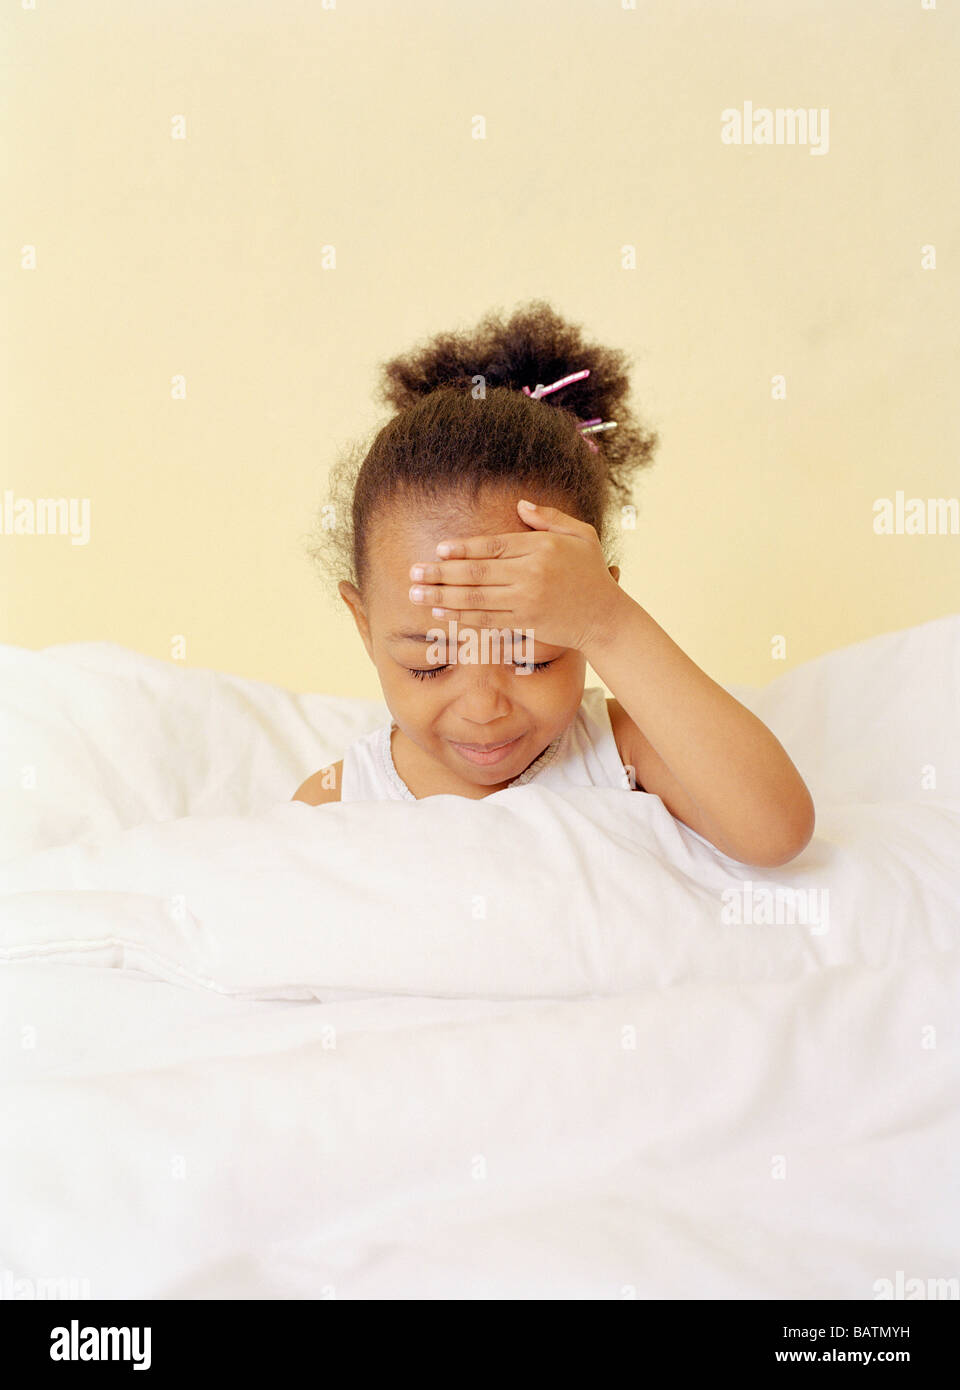 Feverish child. Four-year-oldgirl holding her head. She is in bed with a fever.Fever, known as pyrexia. Stock Photo